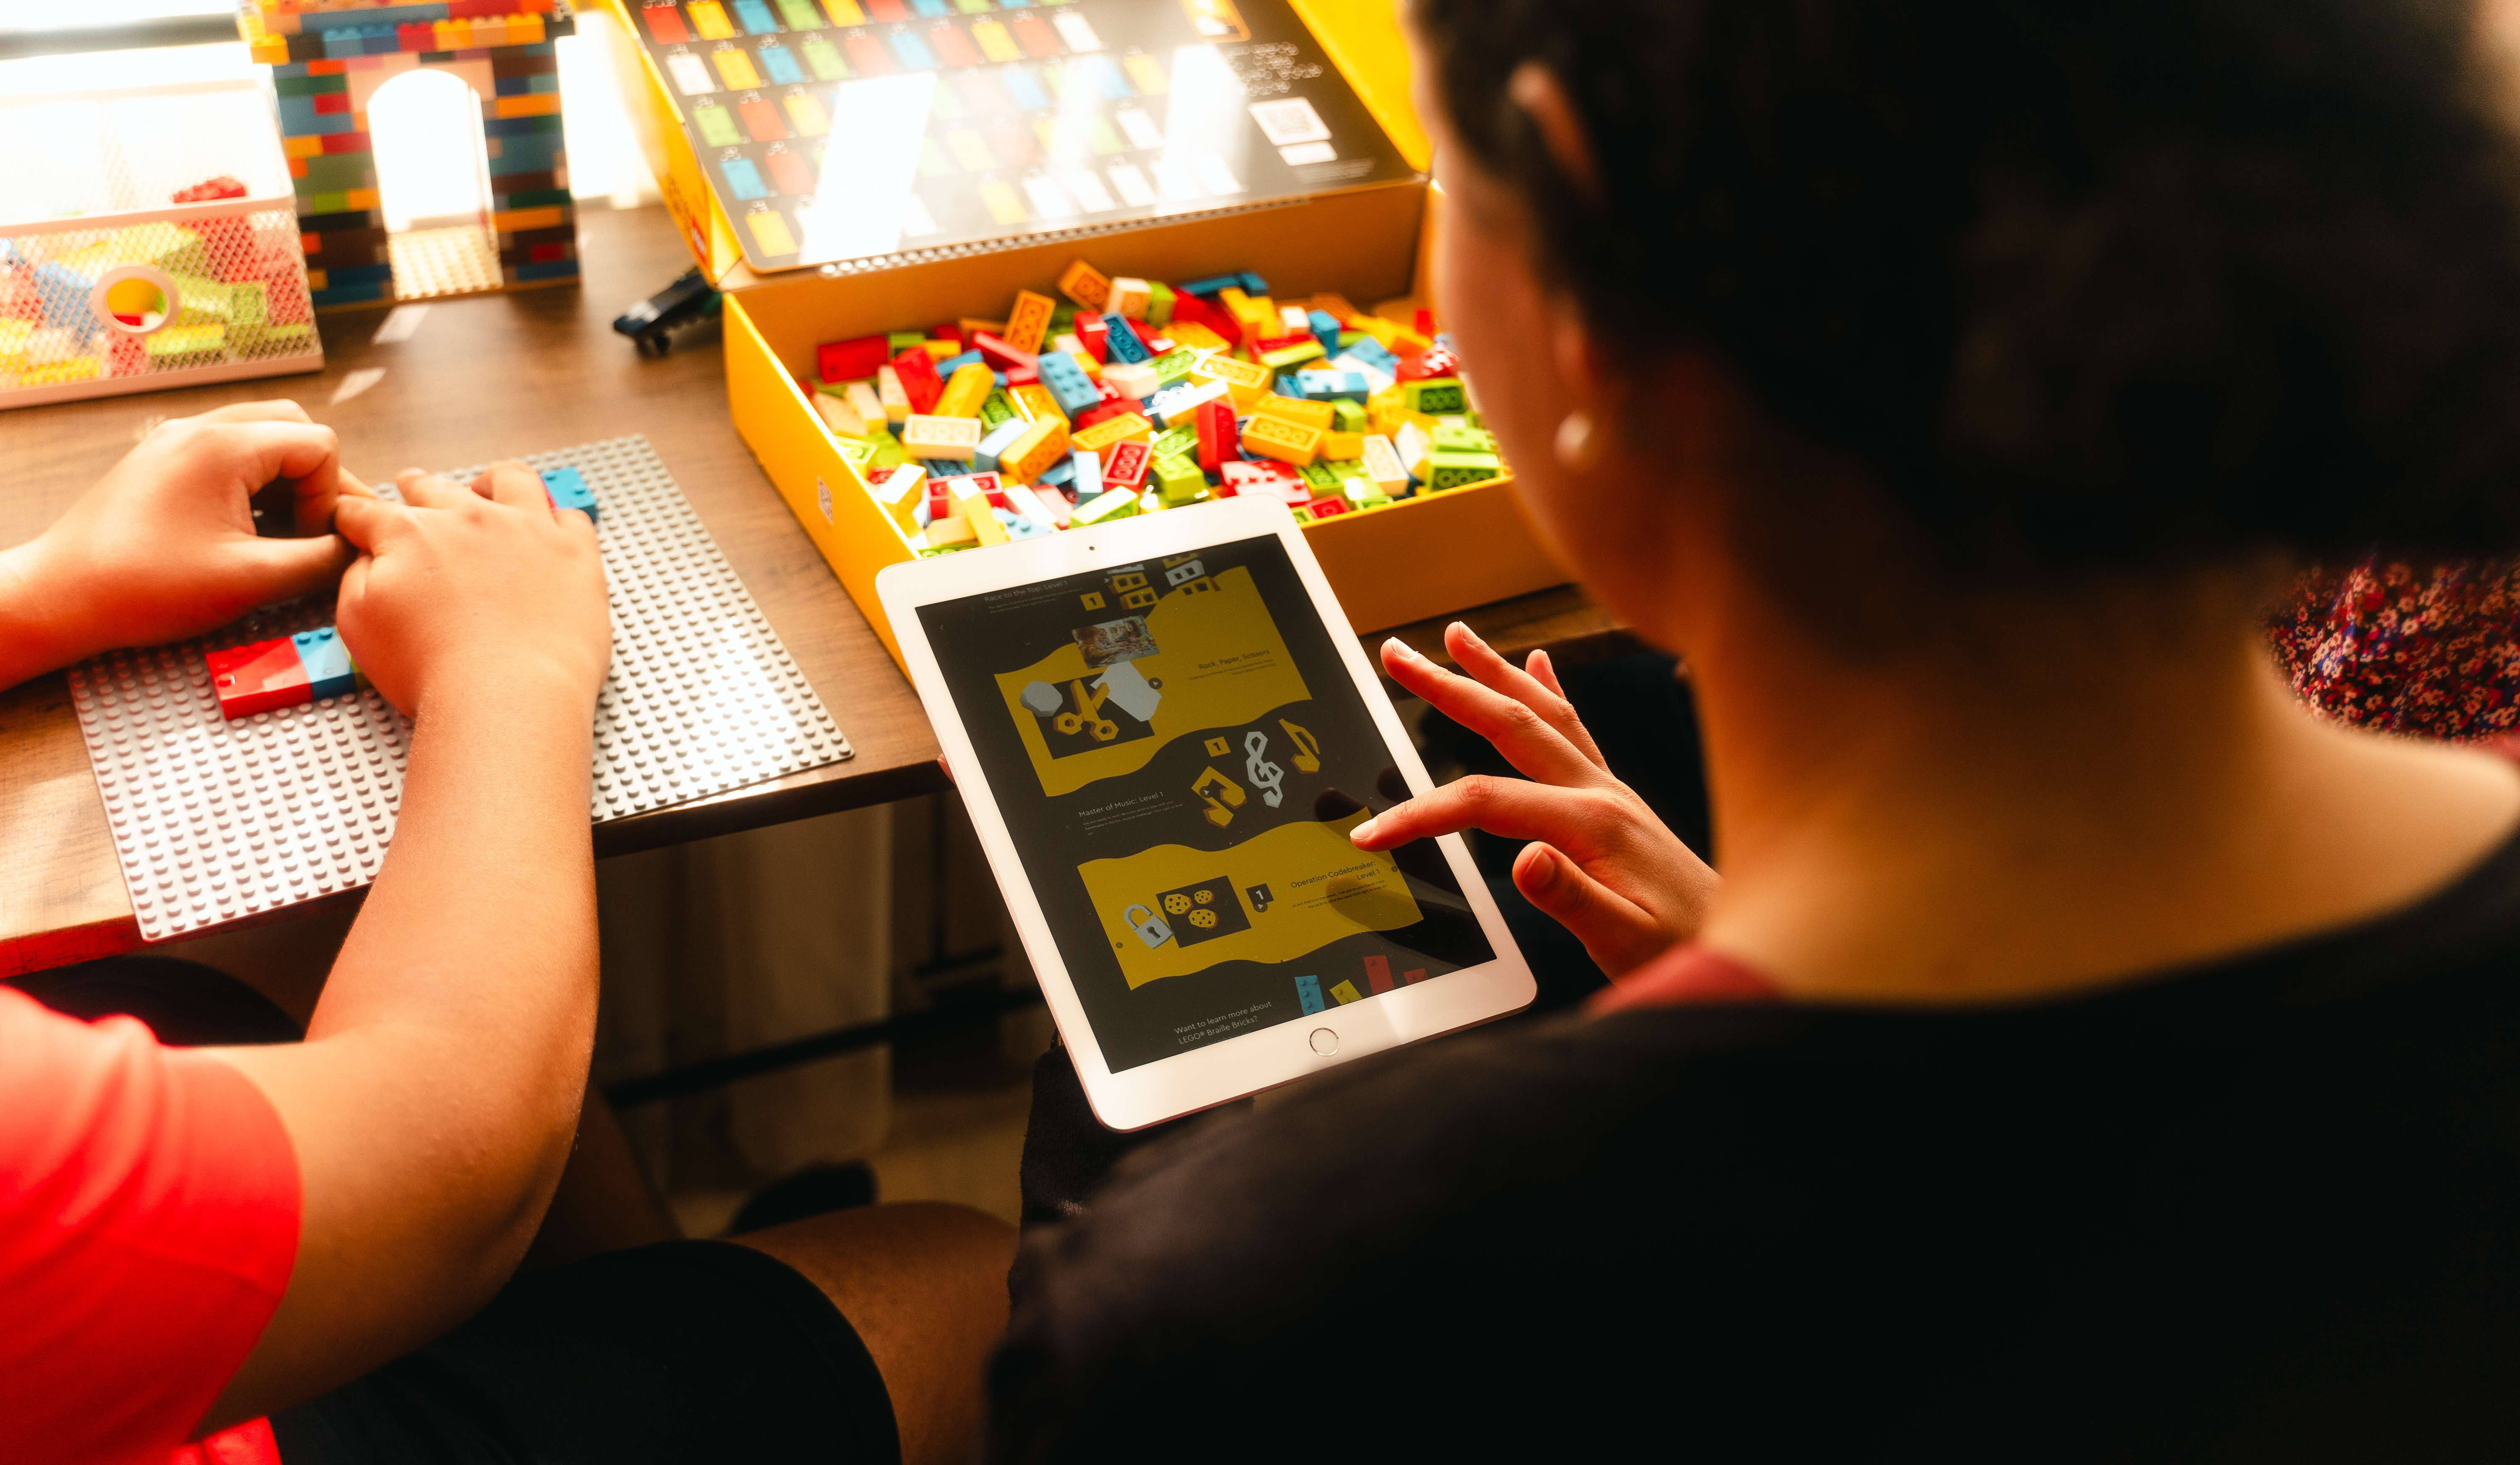 A woman looks at a tablet screen displaying one of the Lego Braille Bricks online PlayStarter activities. An open box of Lego Braille Bricks on a desk before her, hands build with Lego Braille Bricks on a baseplate on the desk beside the box.